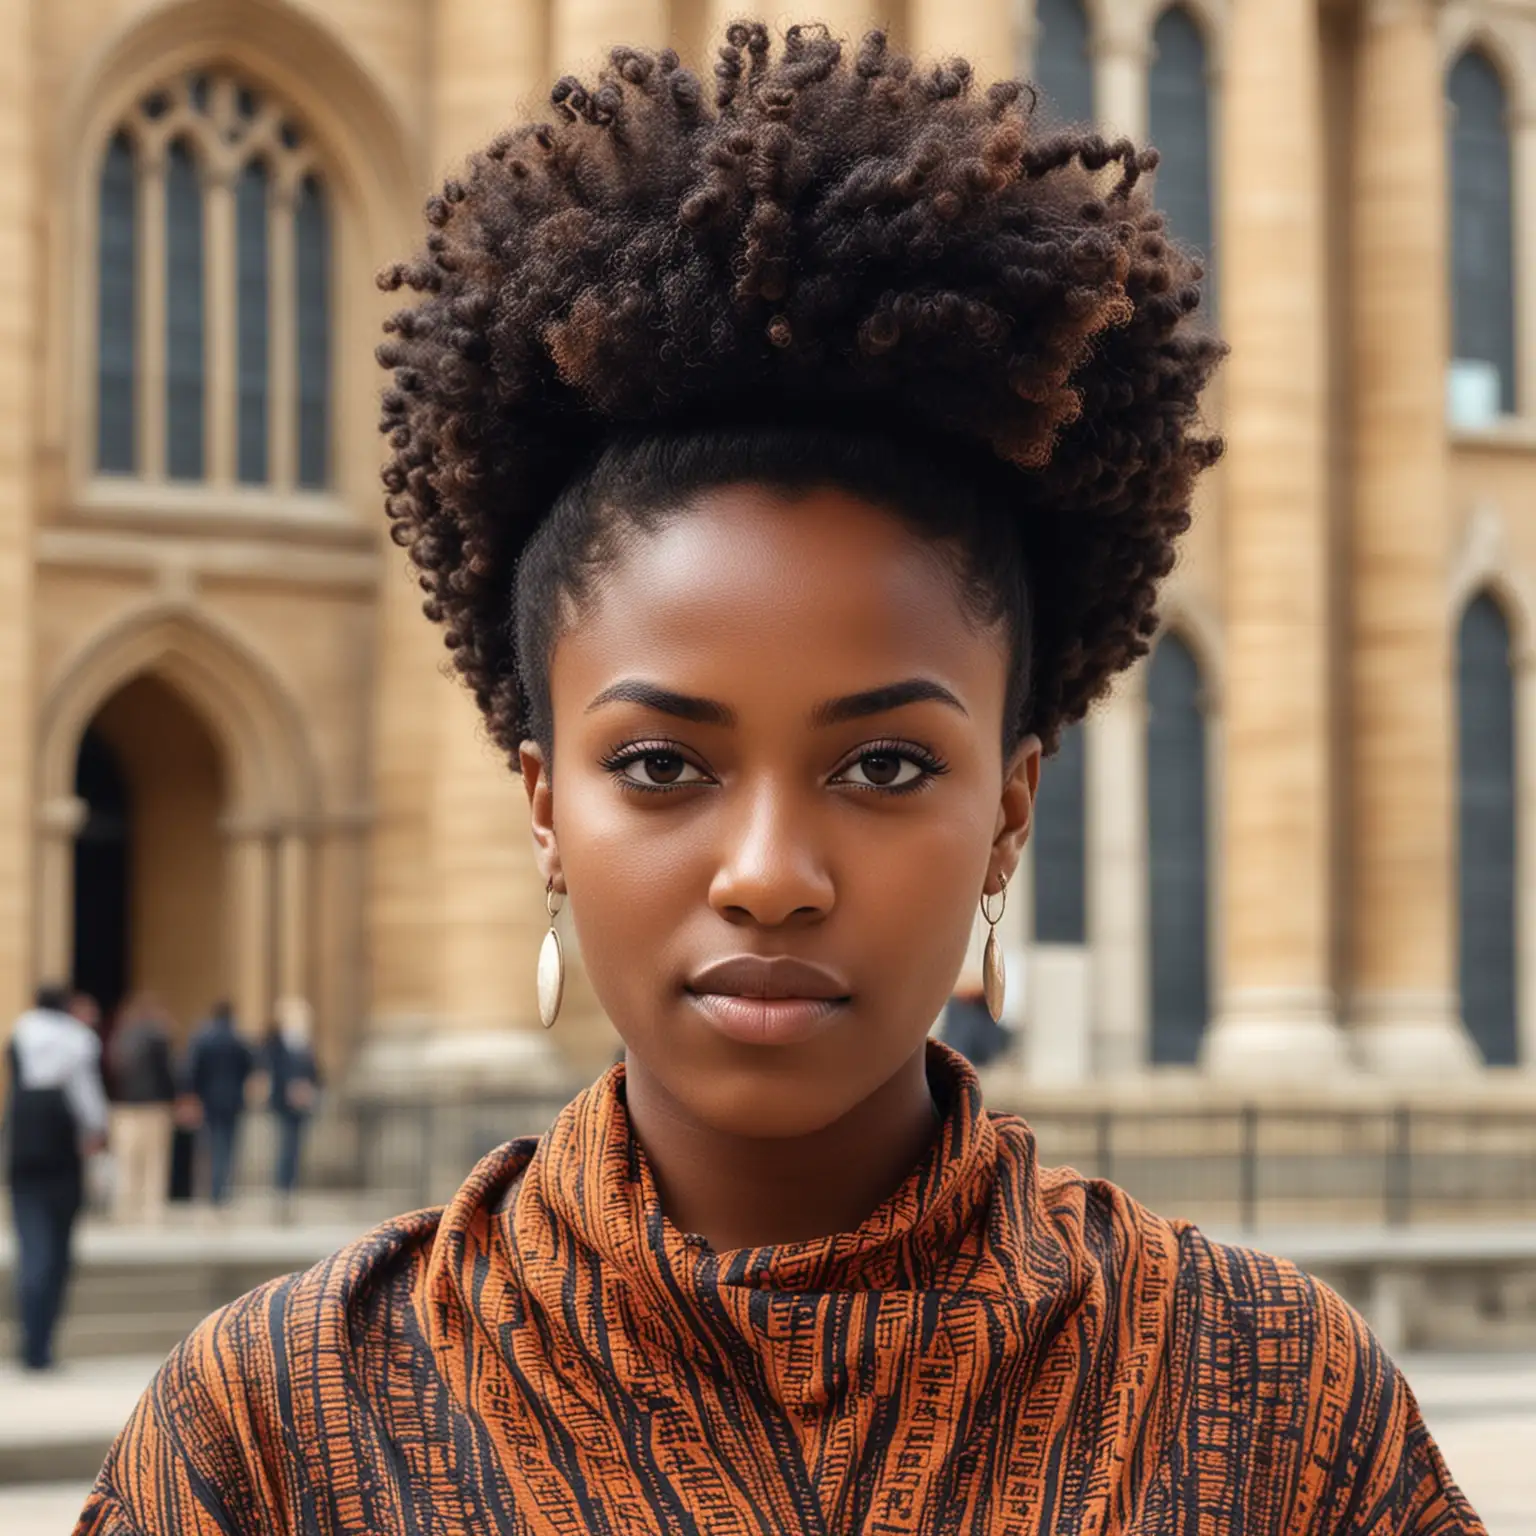 Portrait of 25YearOld Black Woman with African Hairstyle at University